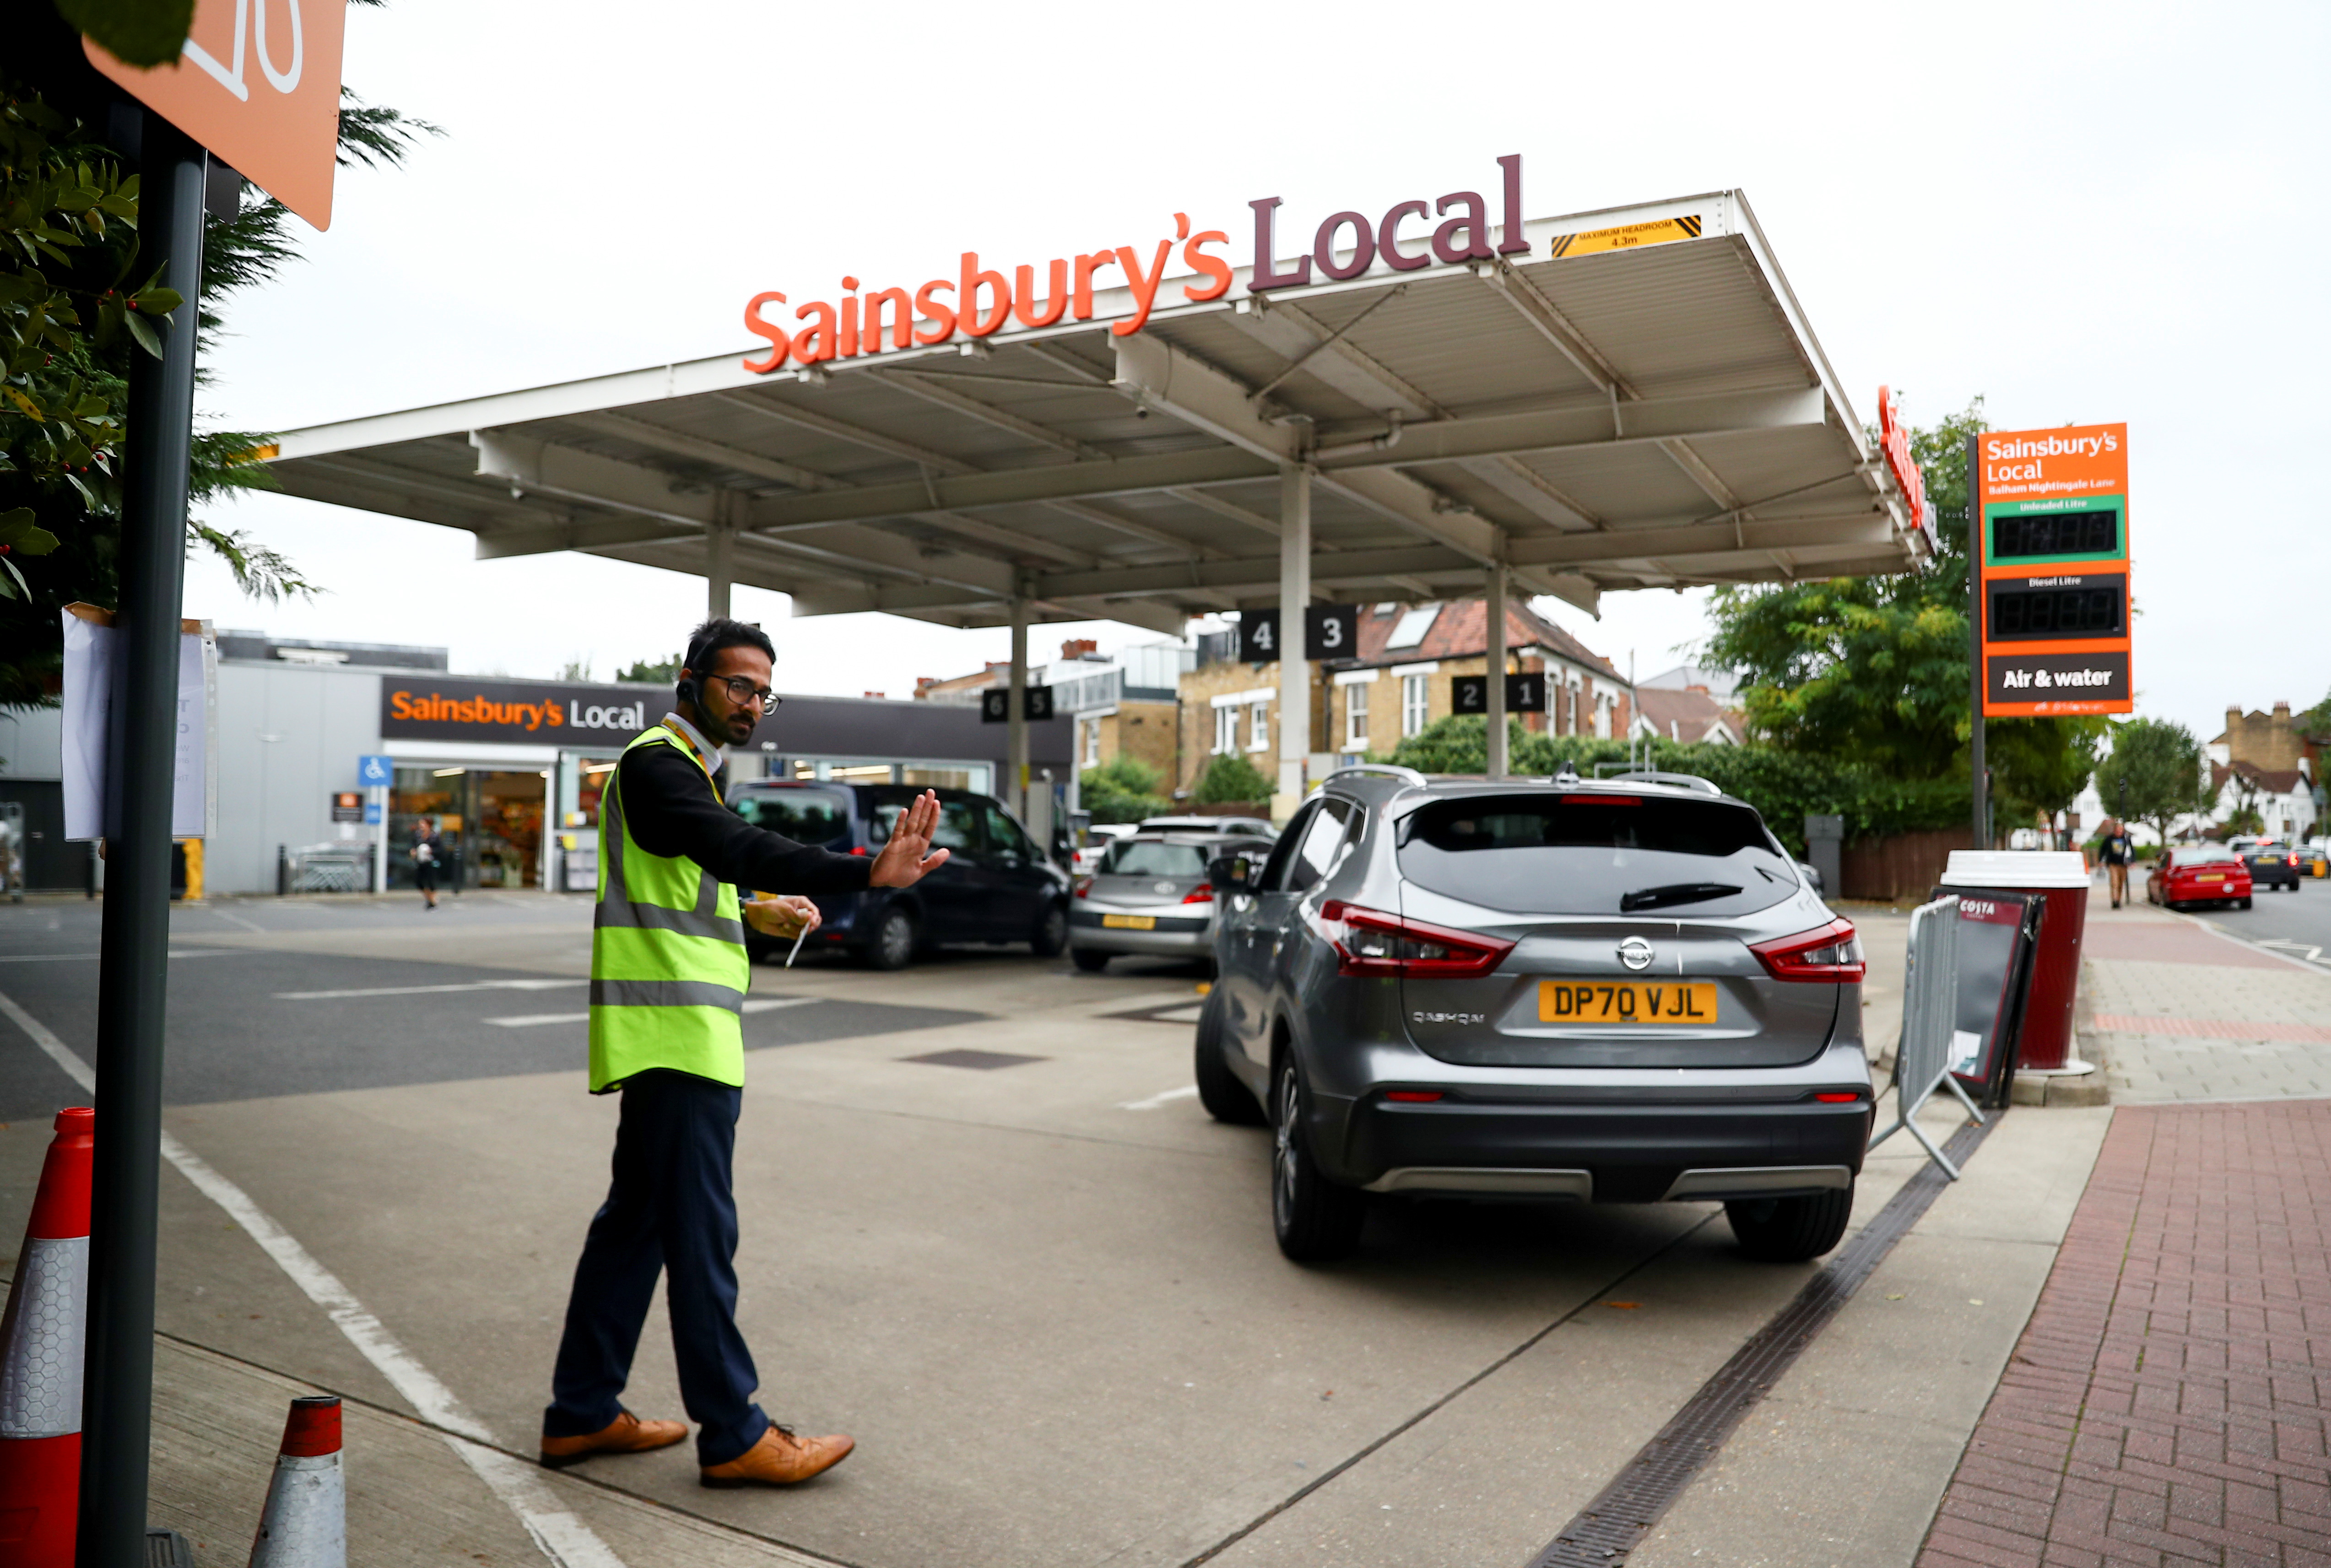 A worker guides vehicles into the forecourt as they queue to refill at a fuel station in London